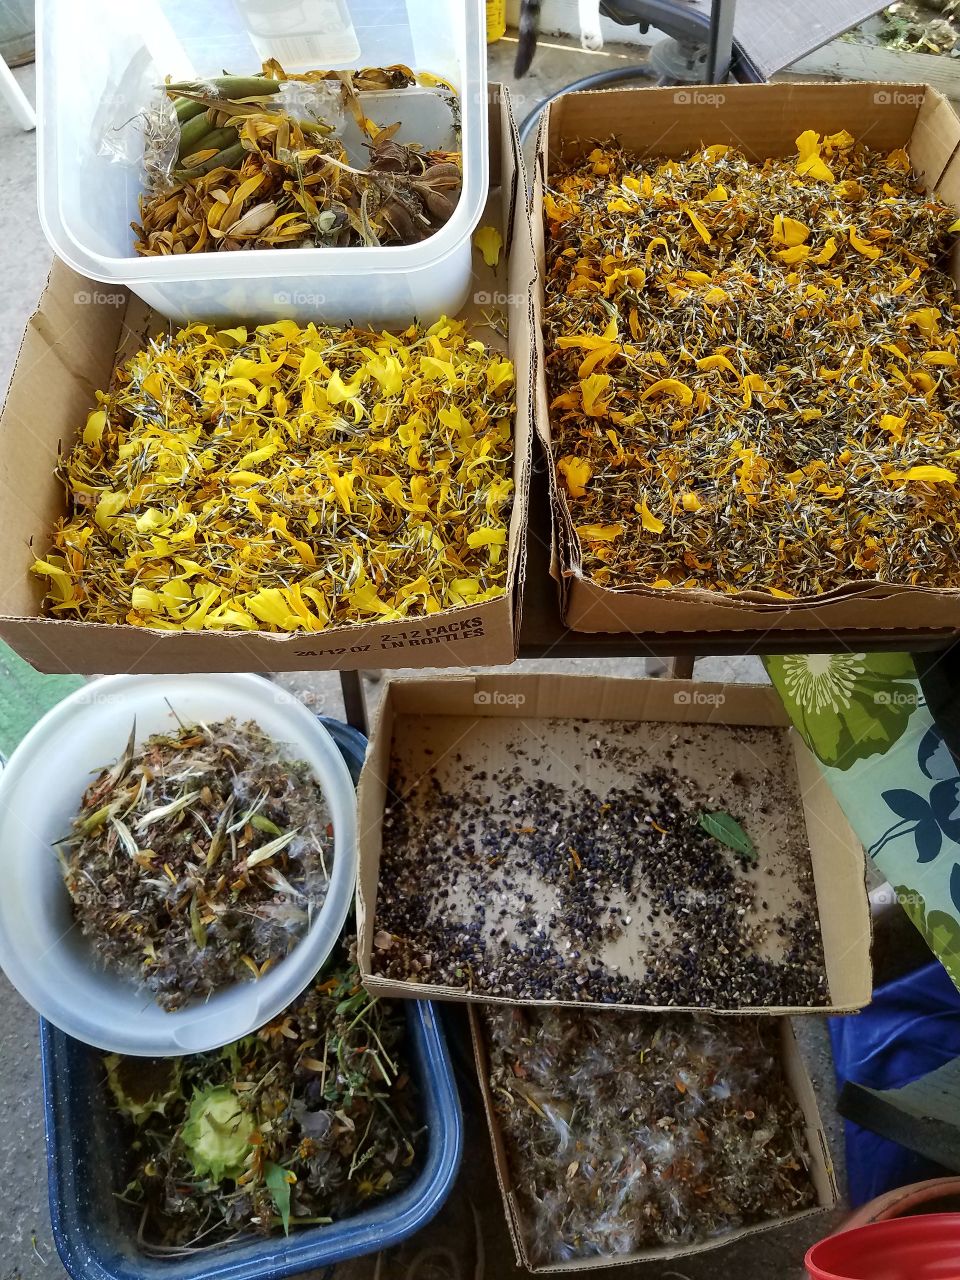 Collecting my flower seeds to dry for next year's planting.